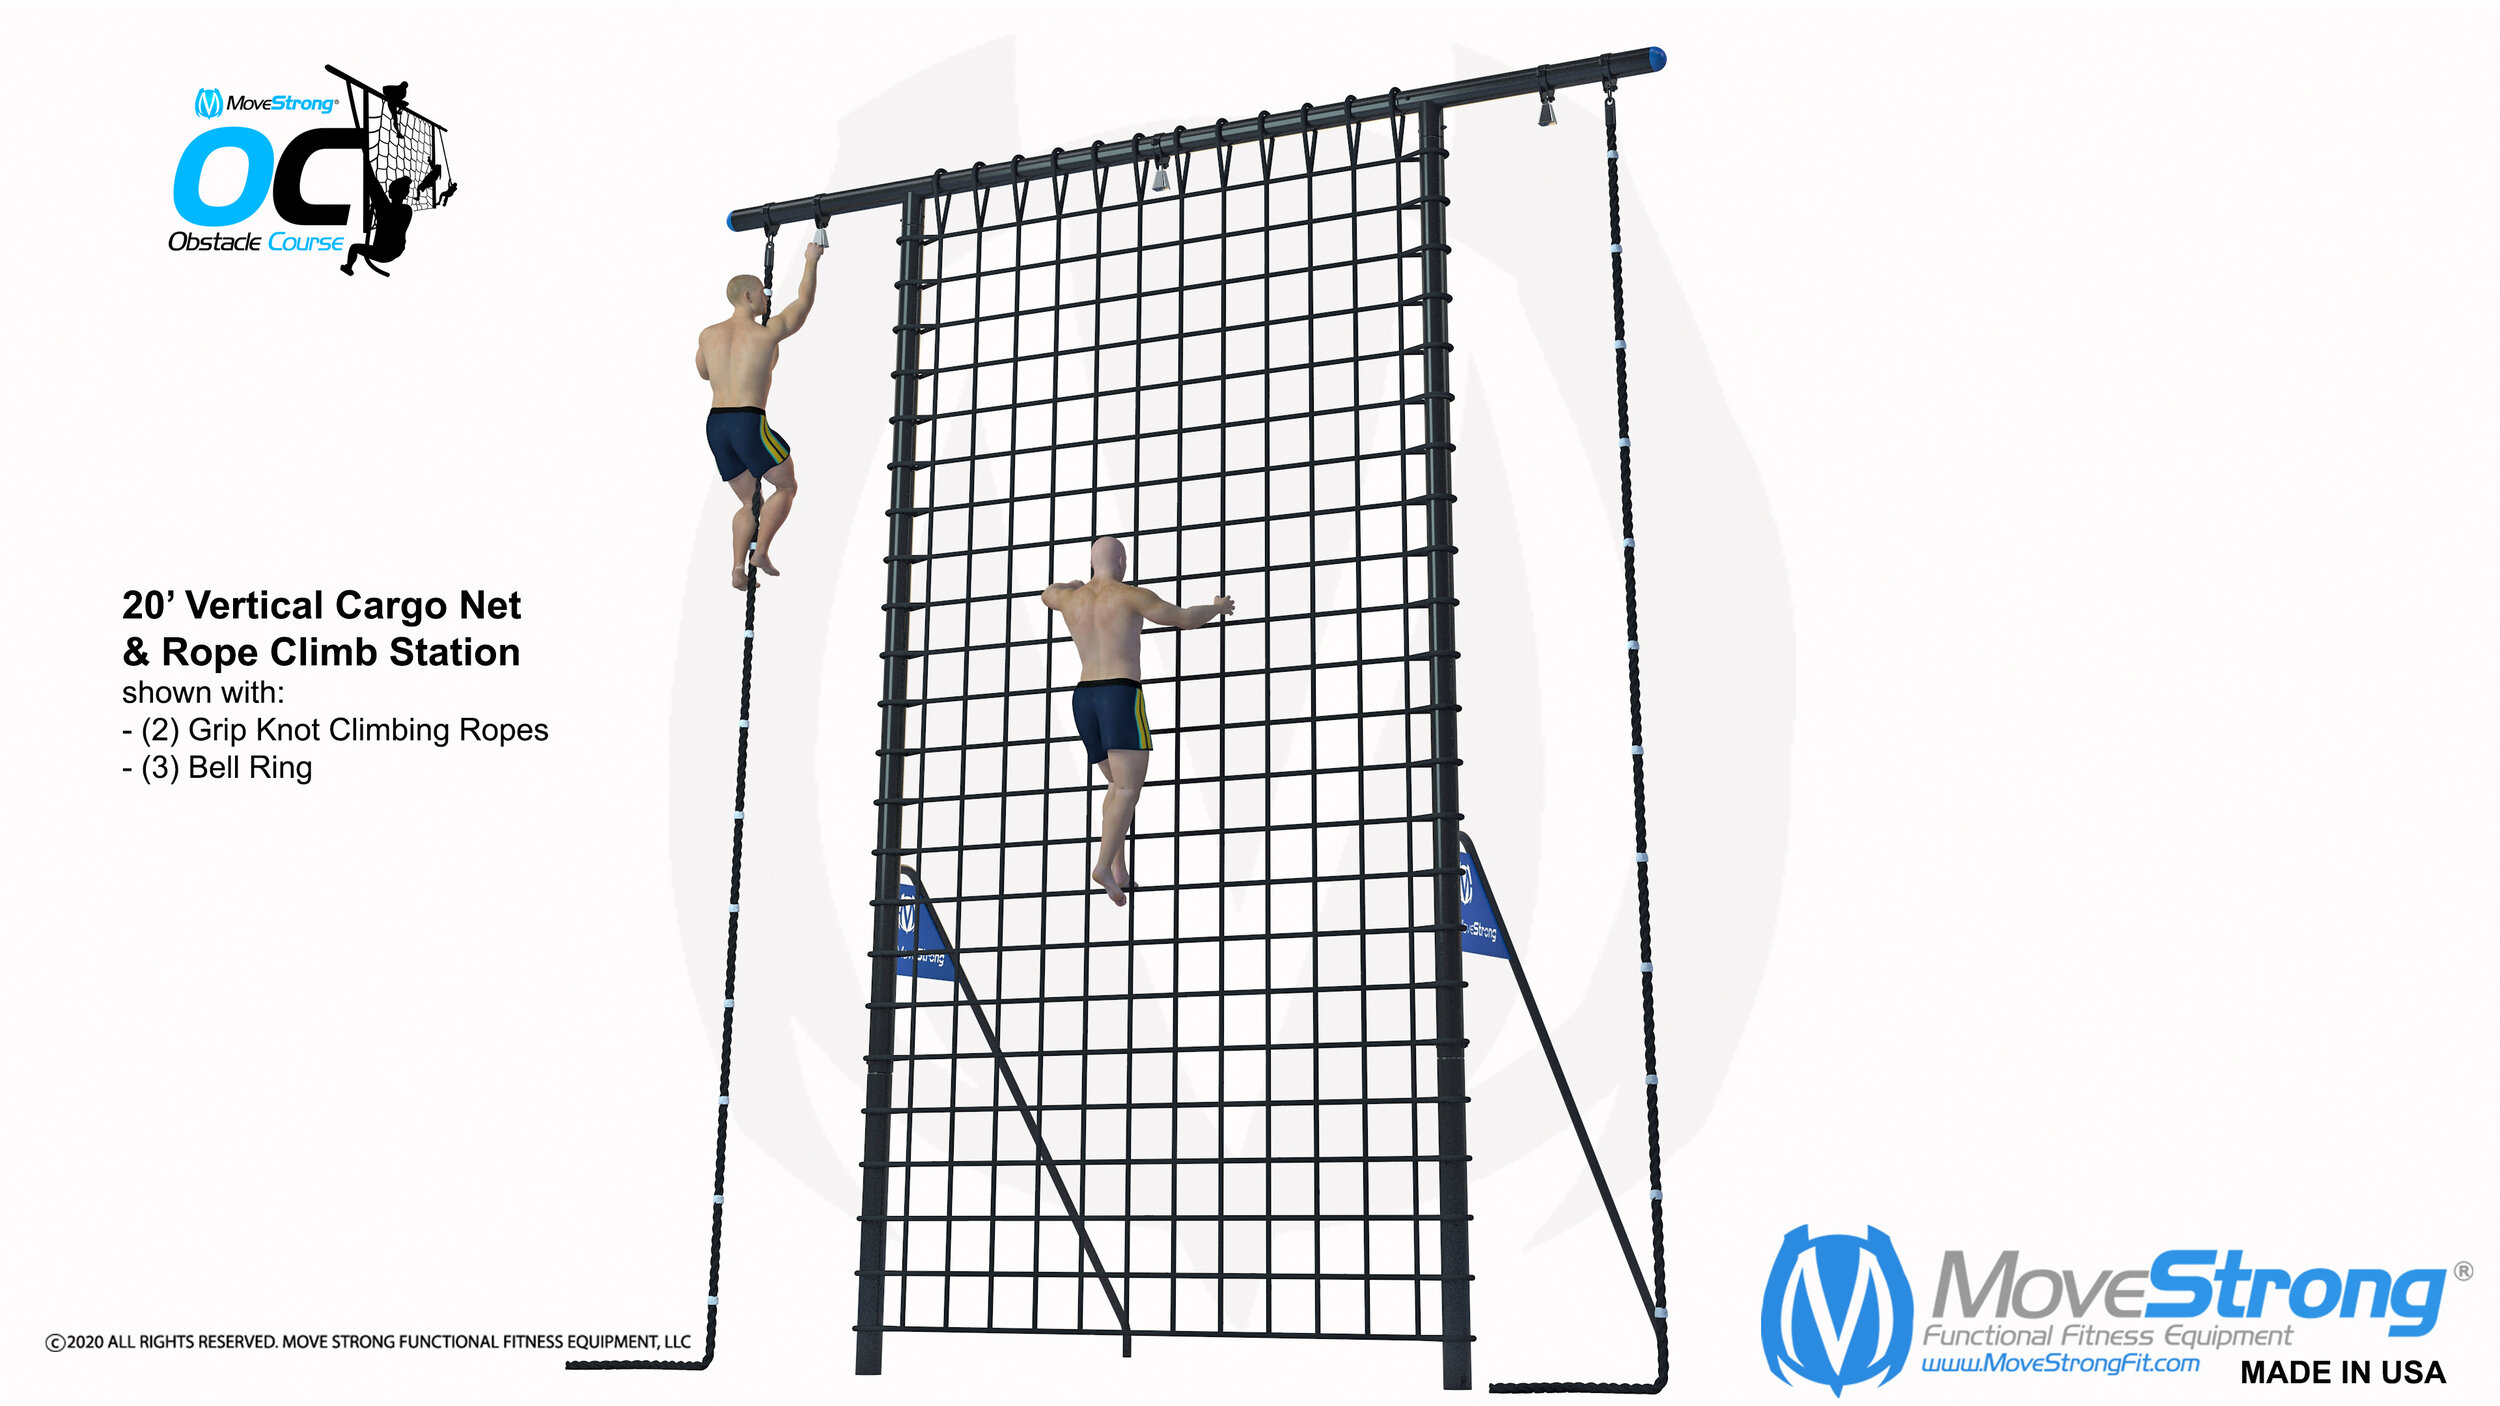 MoveStrong 20' cargonet and Rope climb